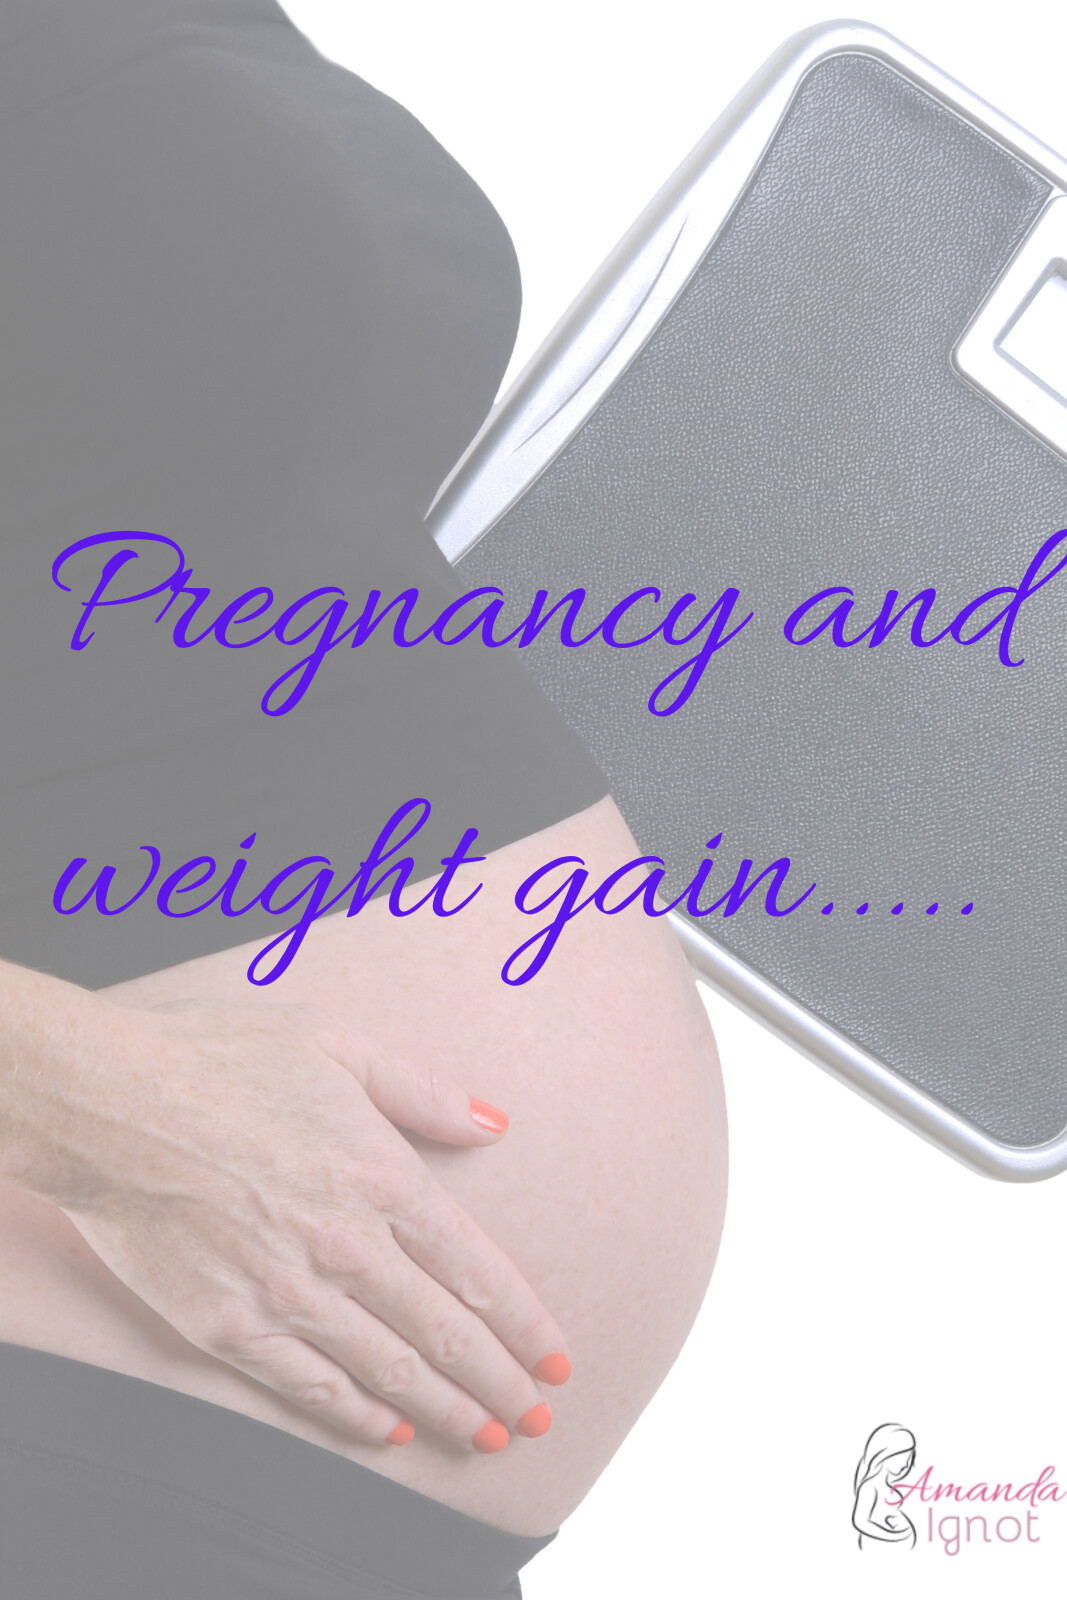 Pregnancy and weight gain….